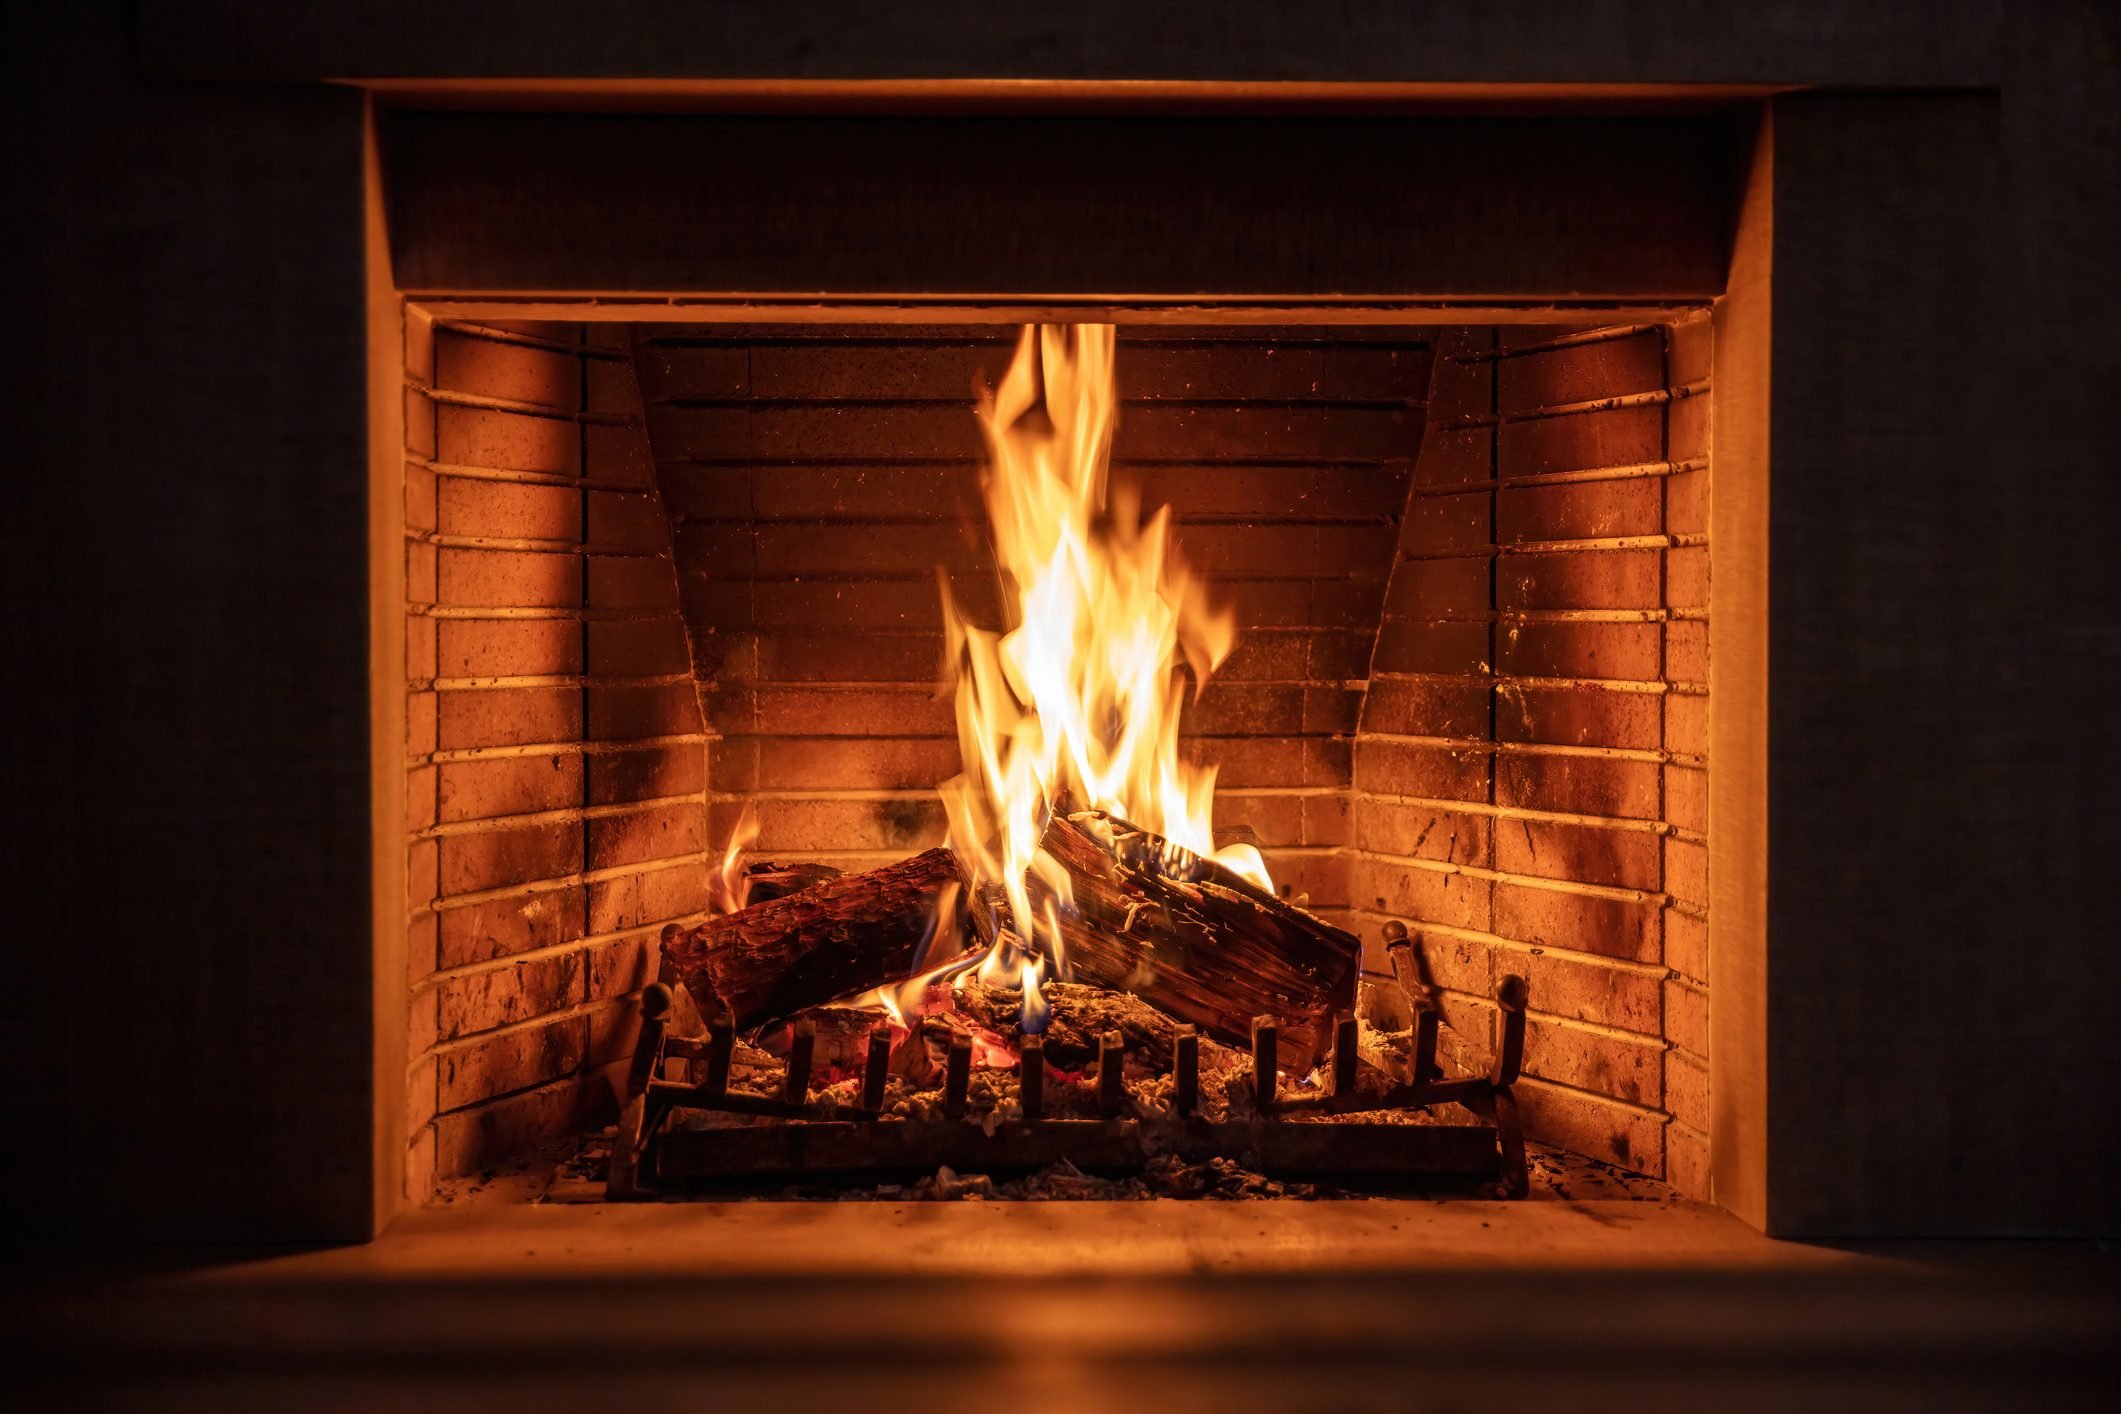 Is My Fireplace Illegal?